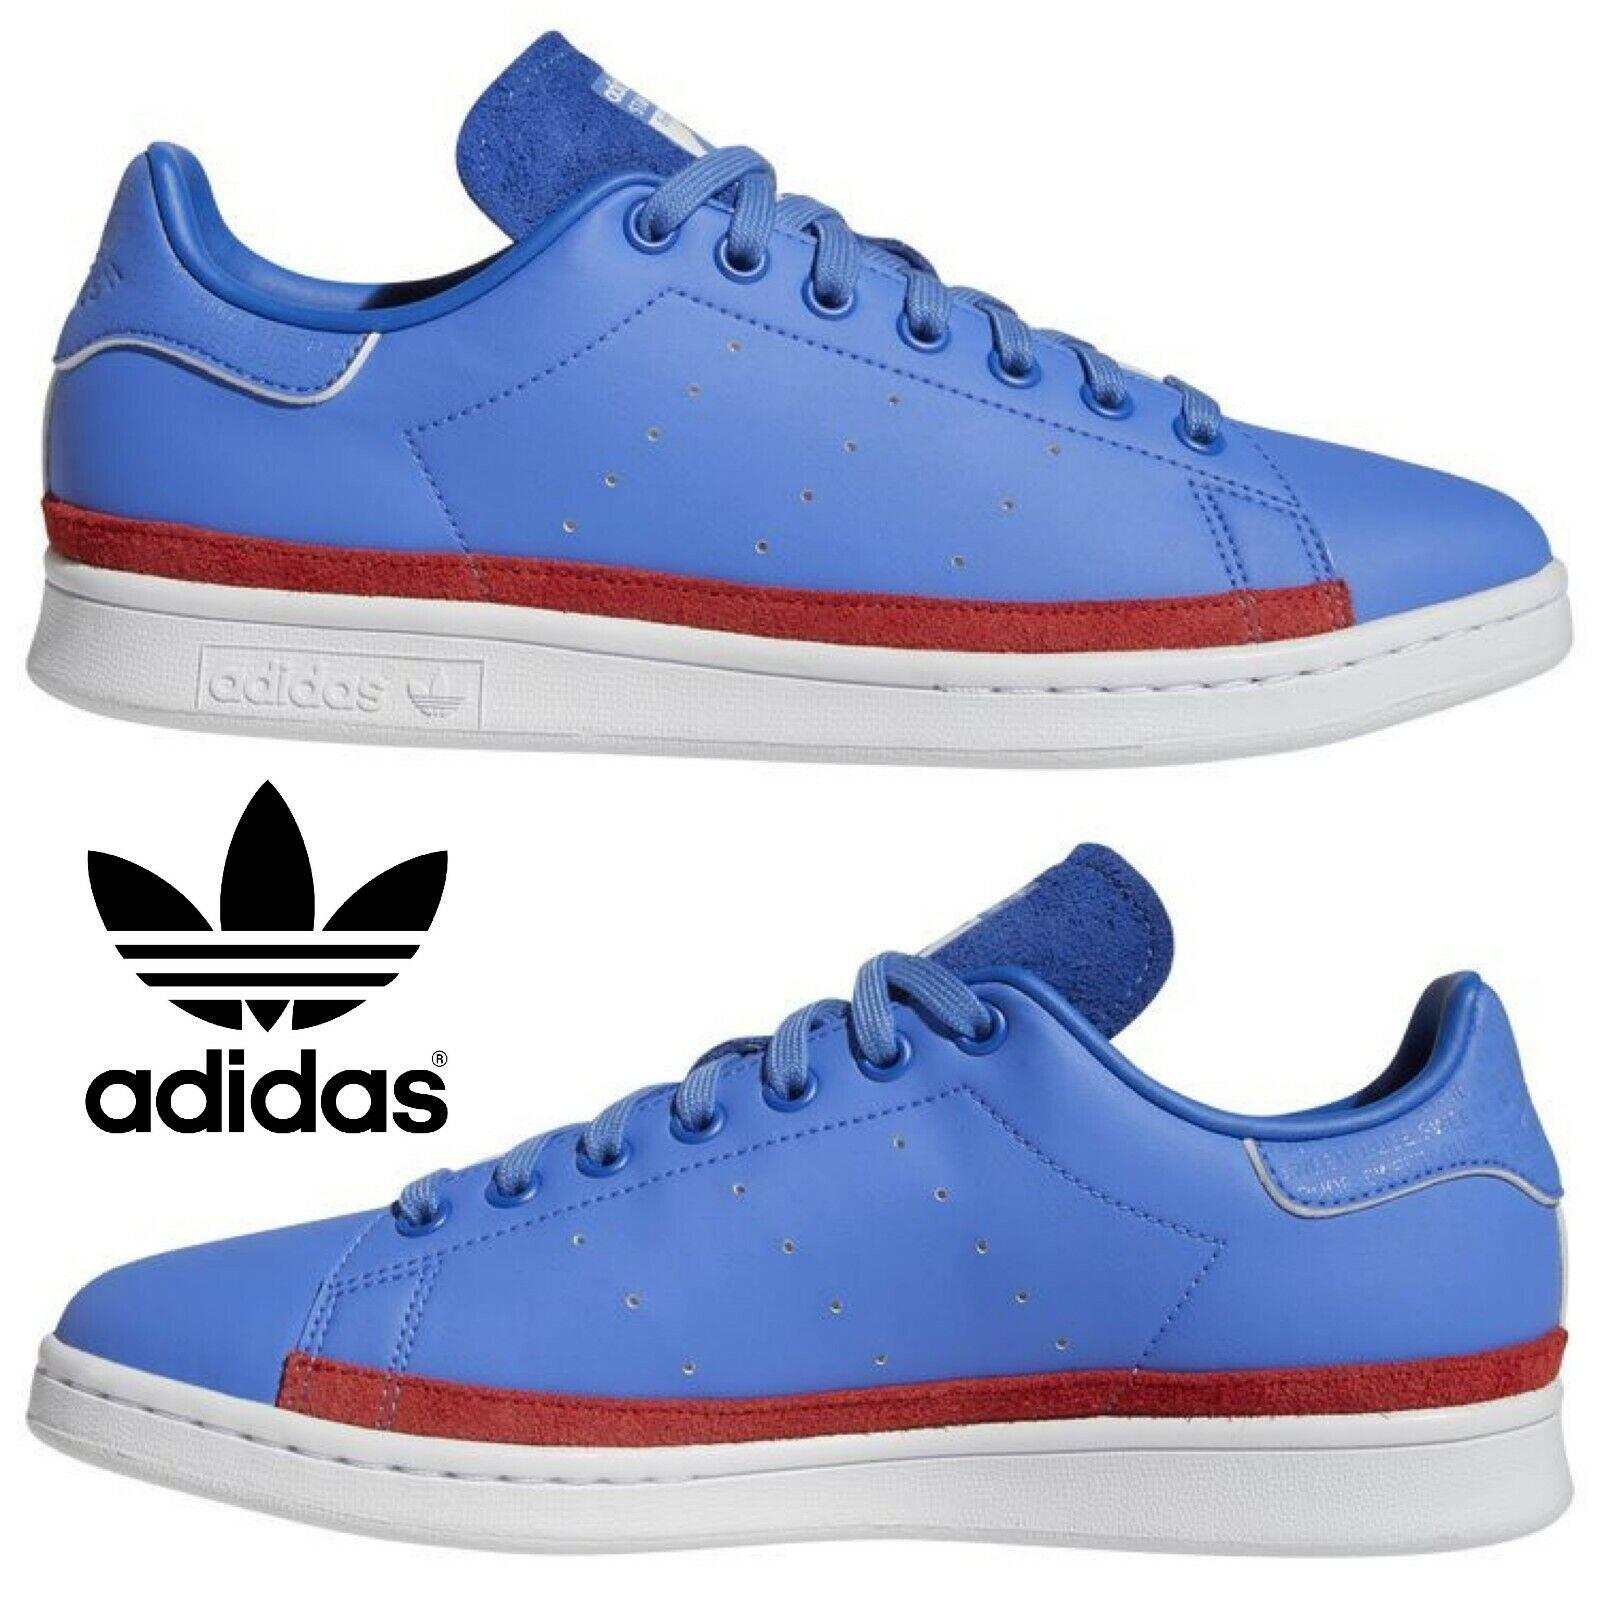 Adidas Originals Stan Smith Men`s Sneakers Comfort Sport Casual Shoes Blue Red - Blue , Blue/Red/White Manufacturer